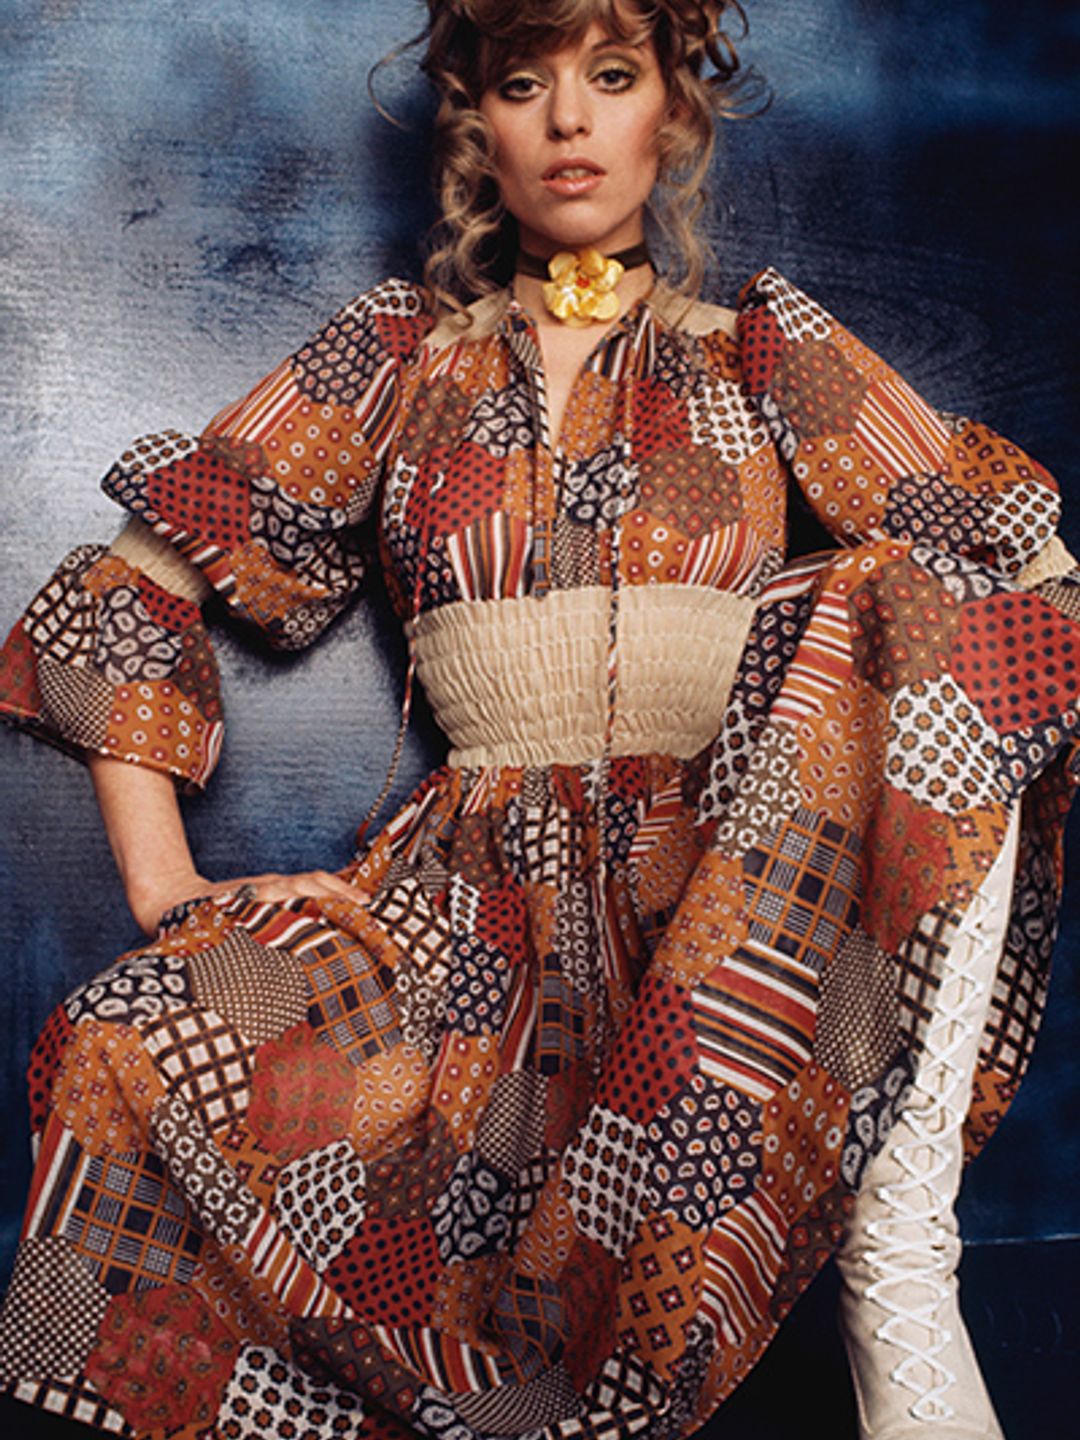 Woman wearing a patchwork peasant dress